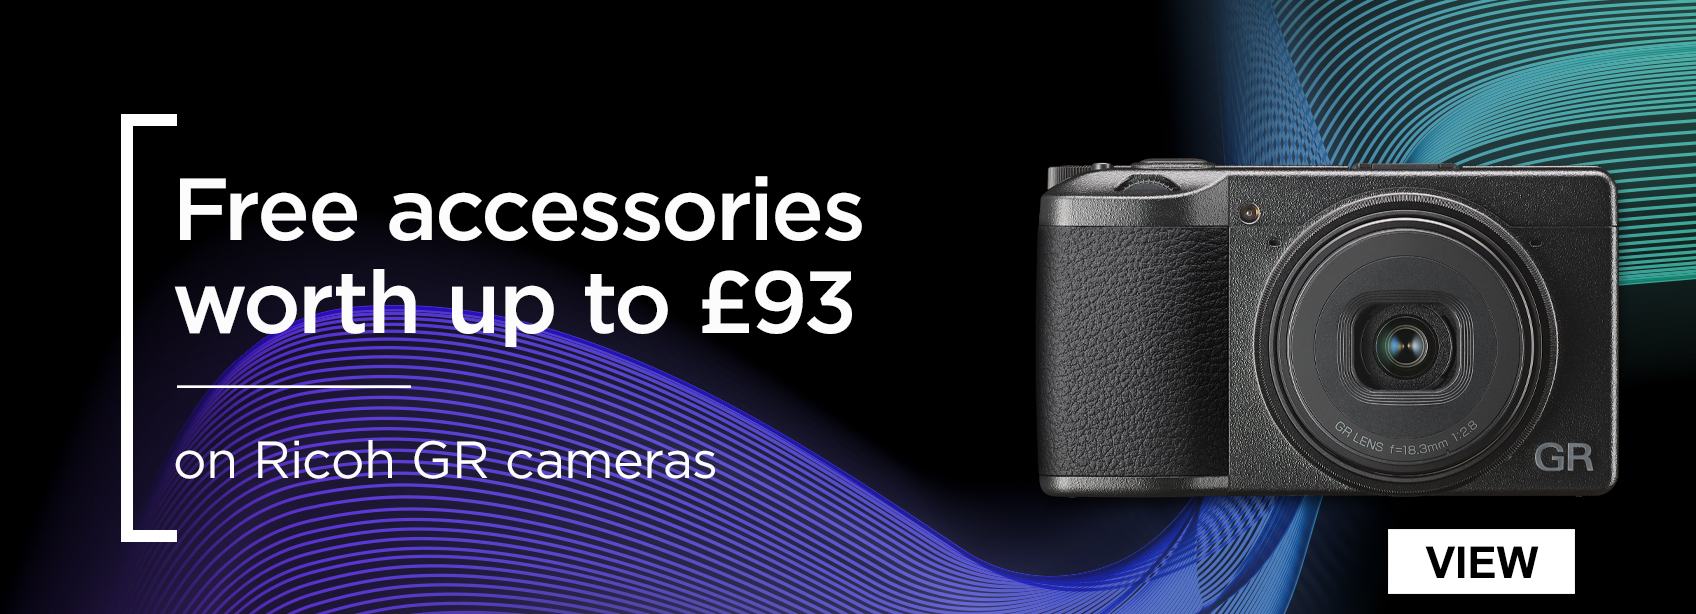 Free accesories worth up to £93 - on Ricoh GR cameras